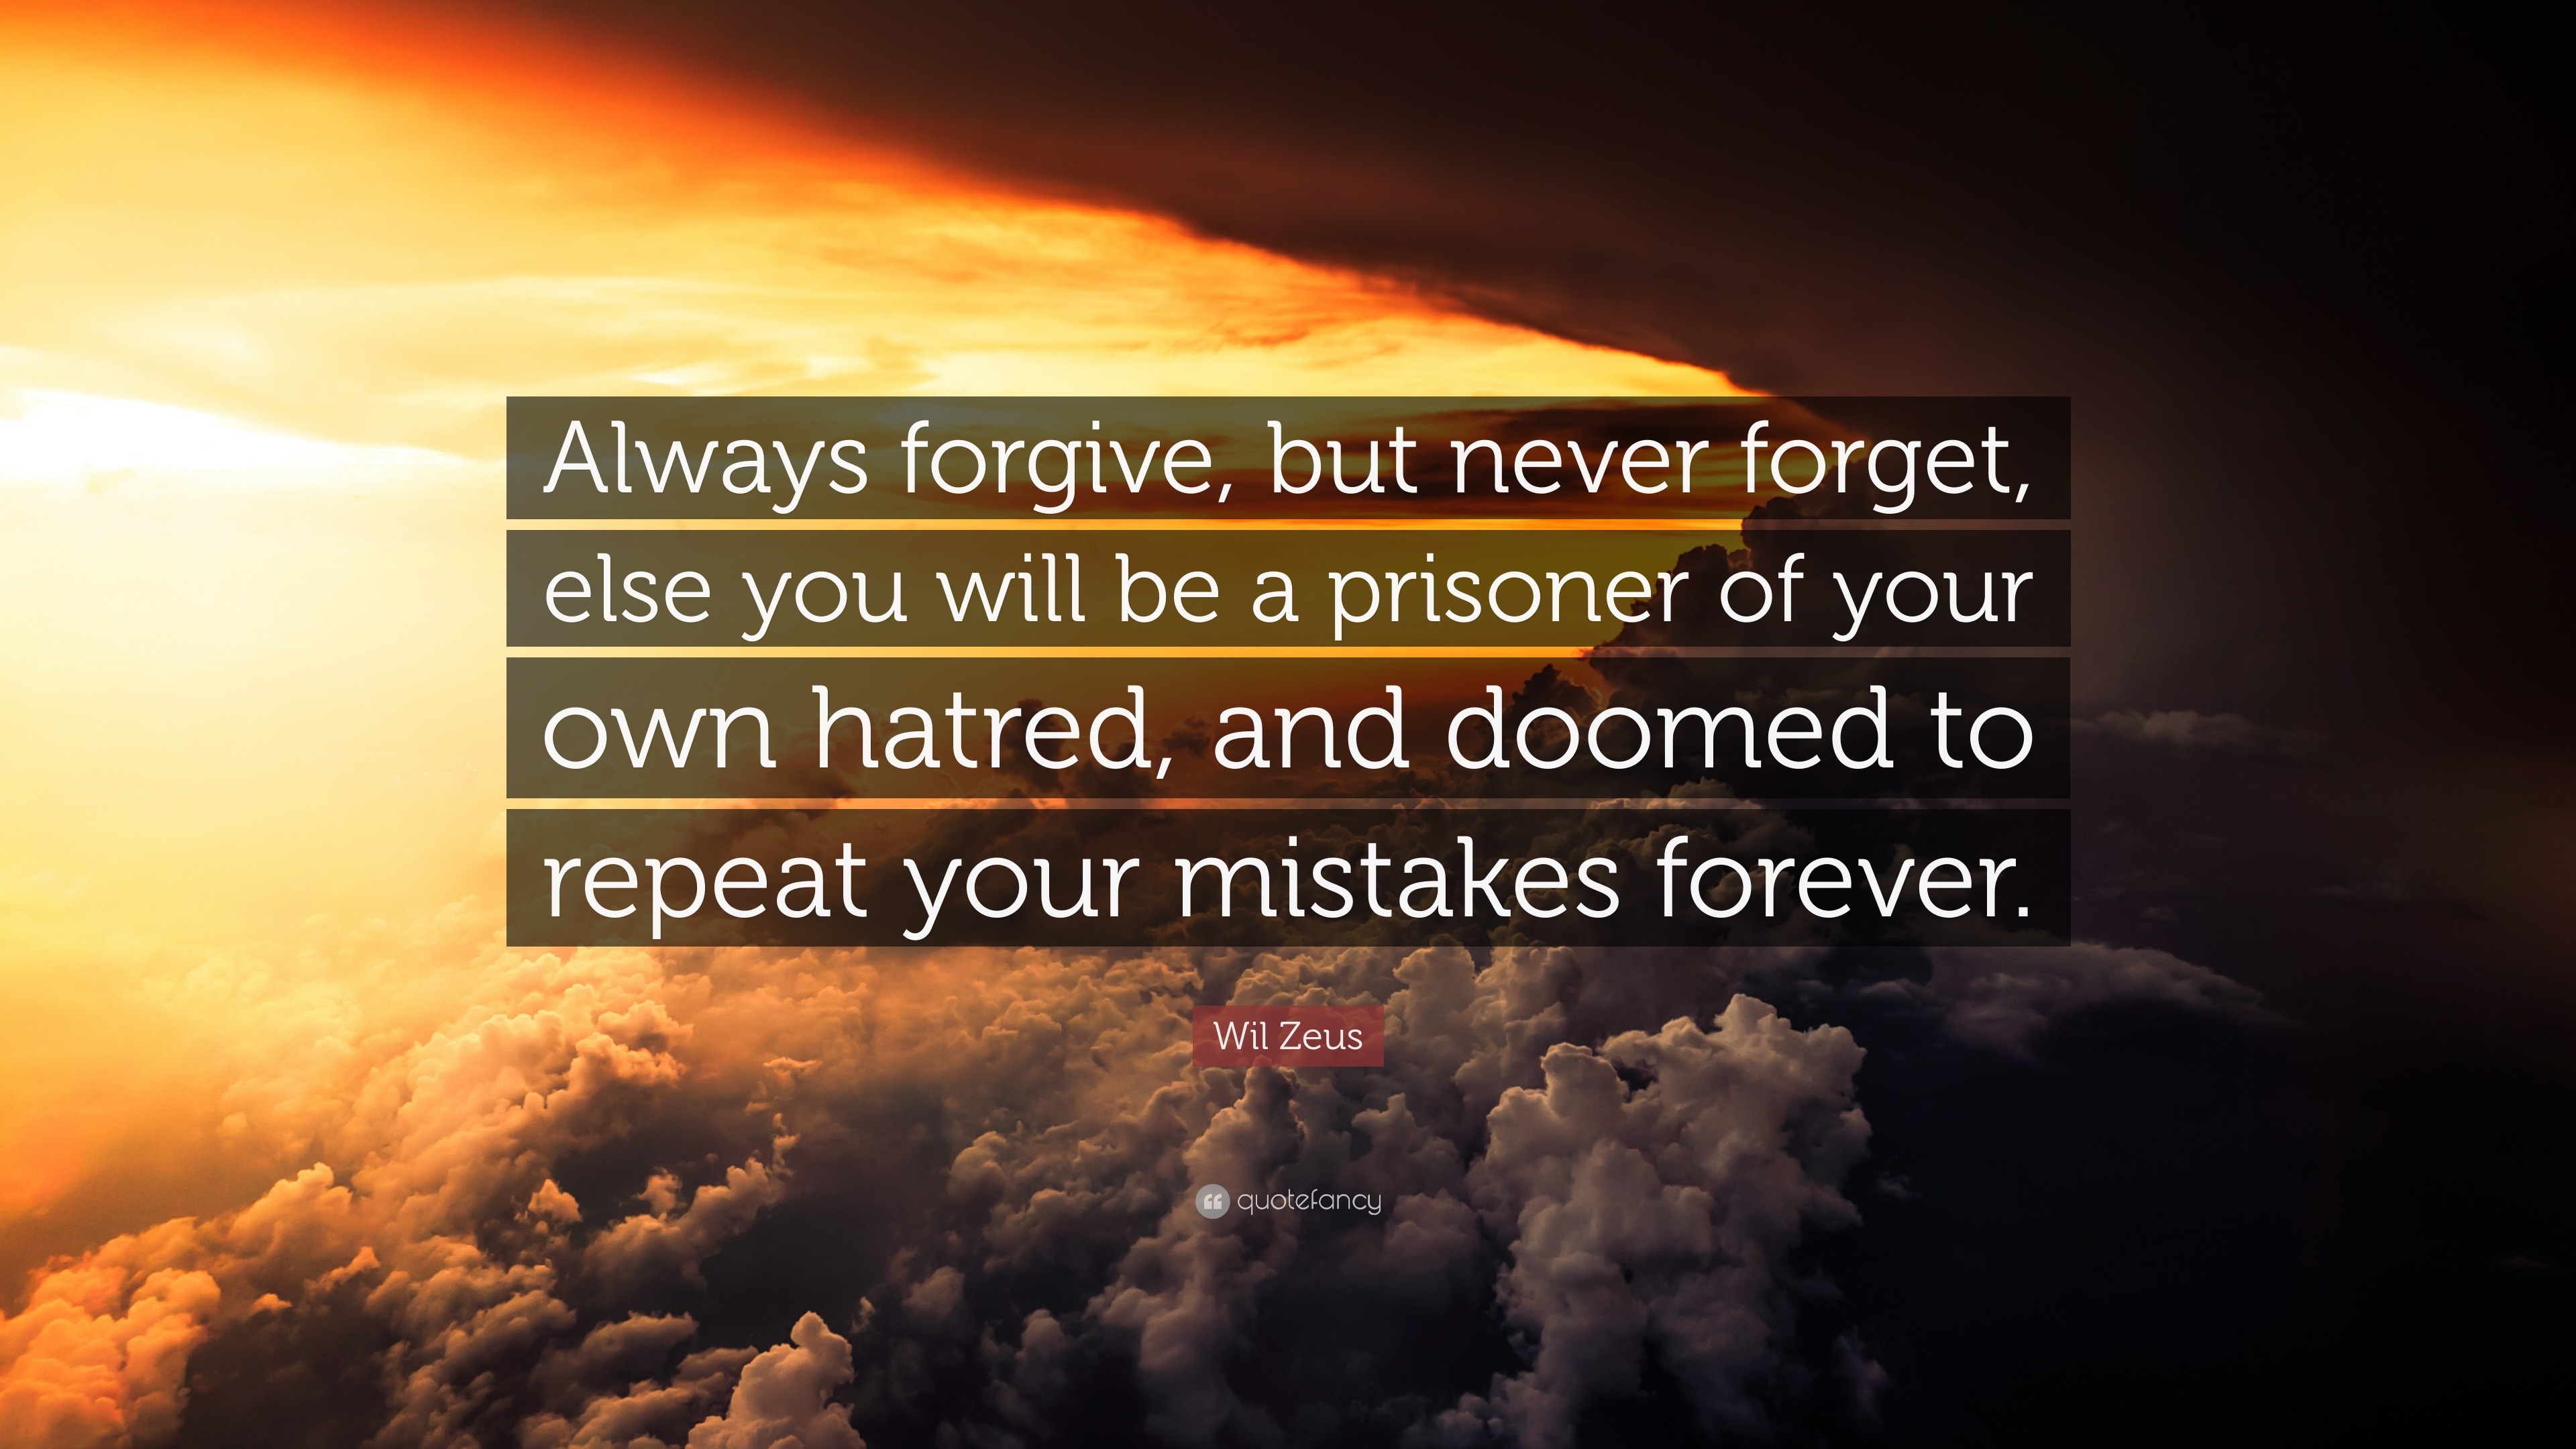 Wil Zeus Quote: “Always forgive, but never forget, else you will be a